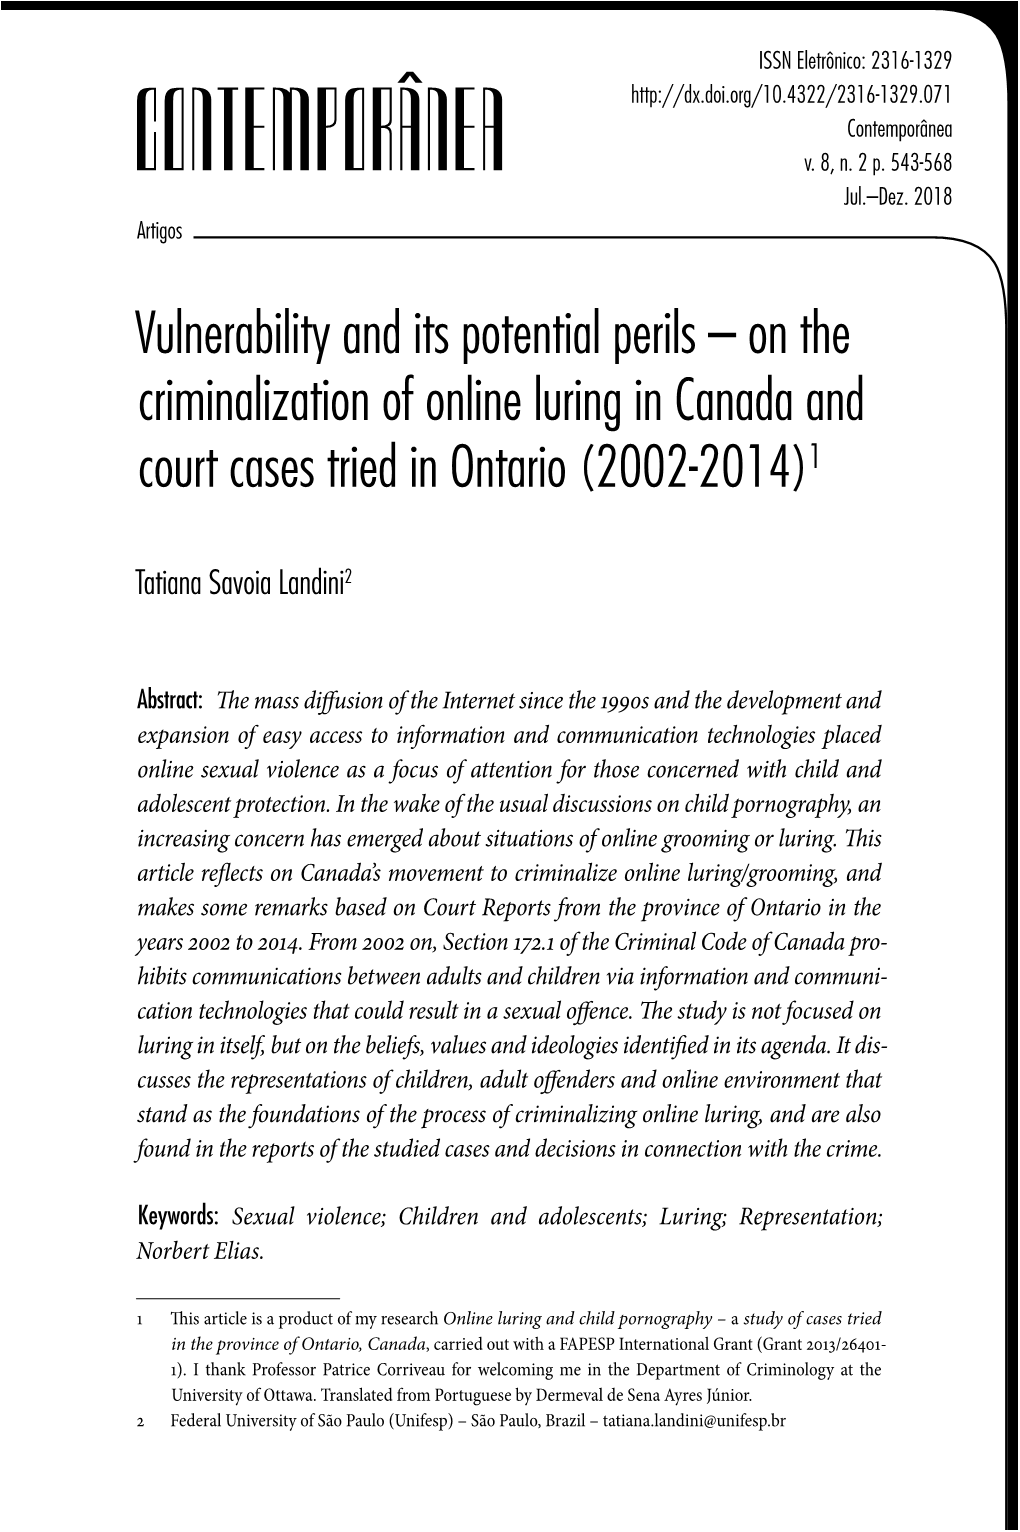 On the Criminalization of Online Luring in Canada and Court Cases Tried in Ontario (2002-2014)1